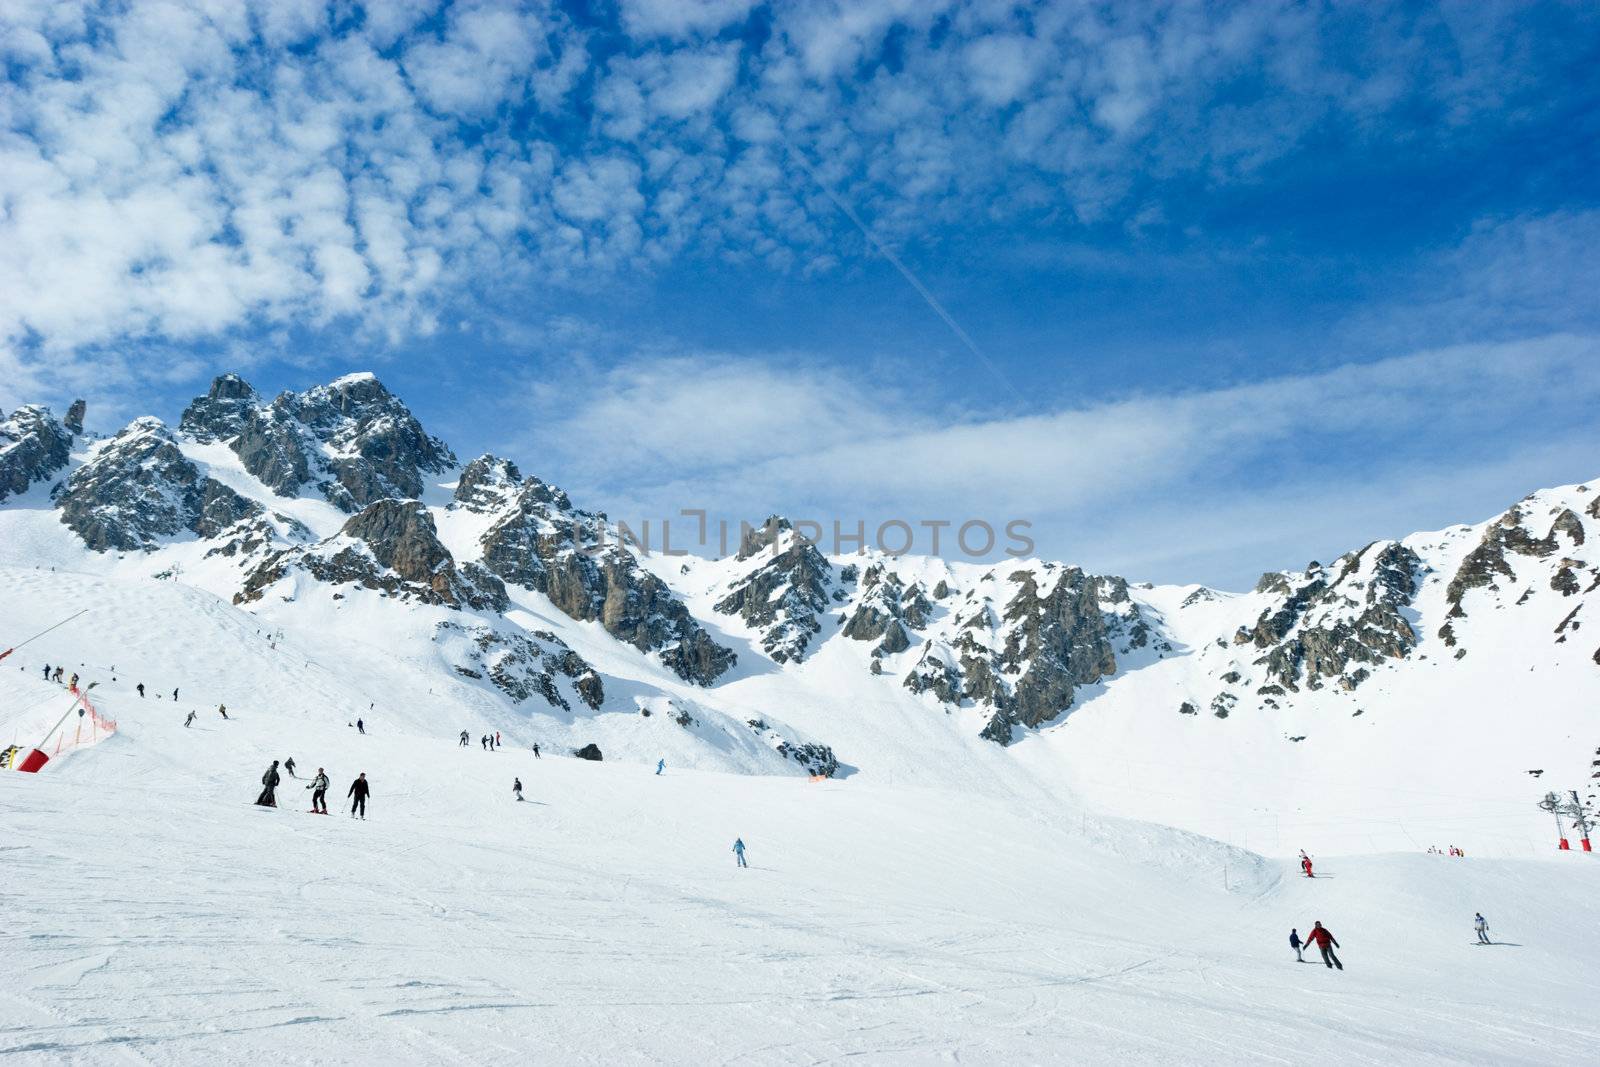 Skiers on a piste at Courchevel ski resort, French Alps